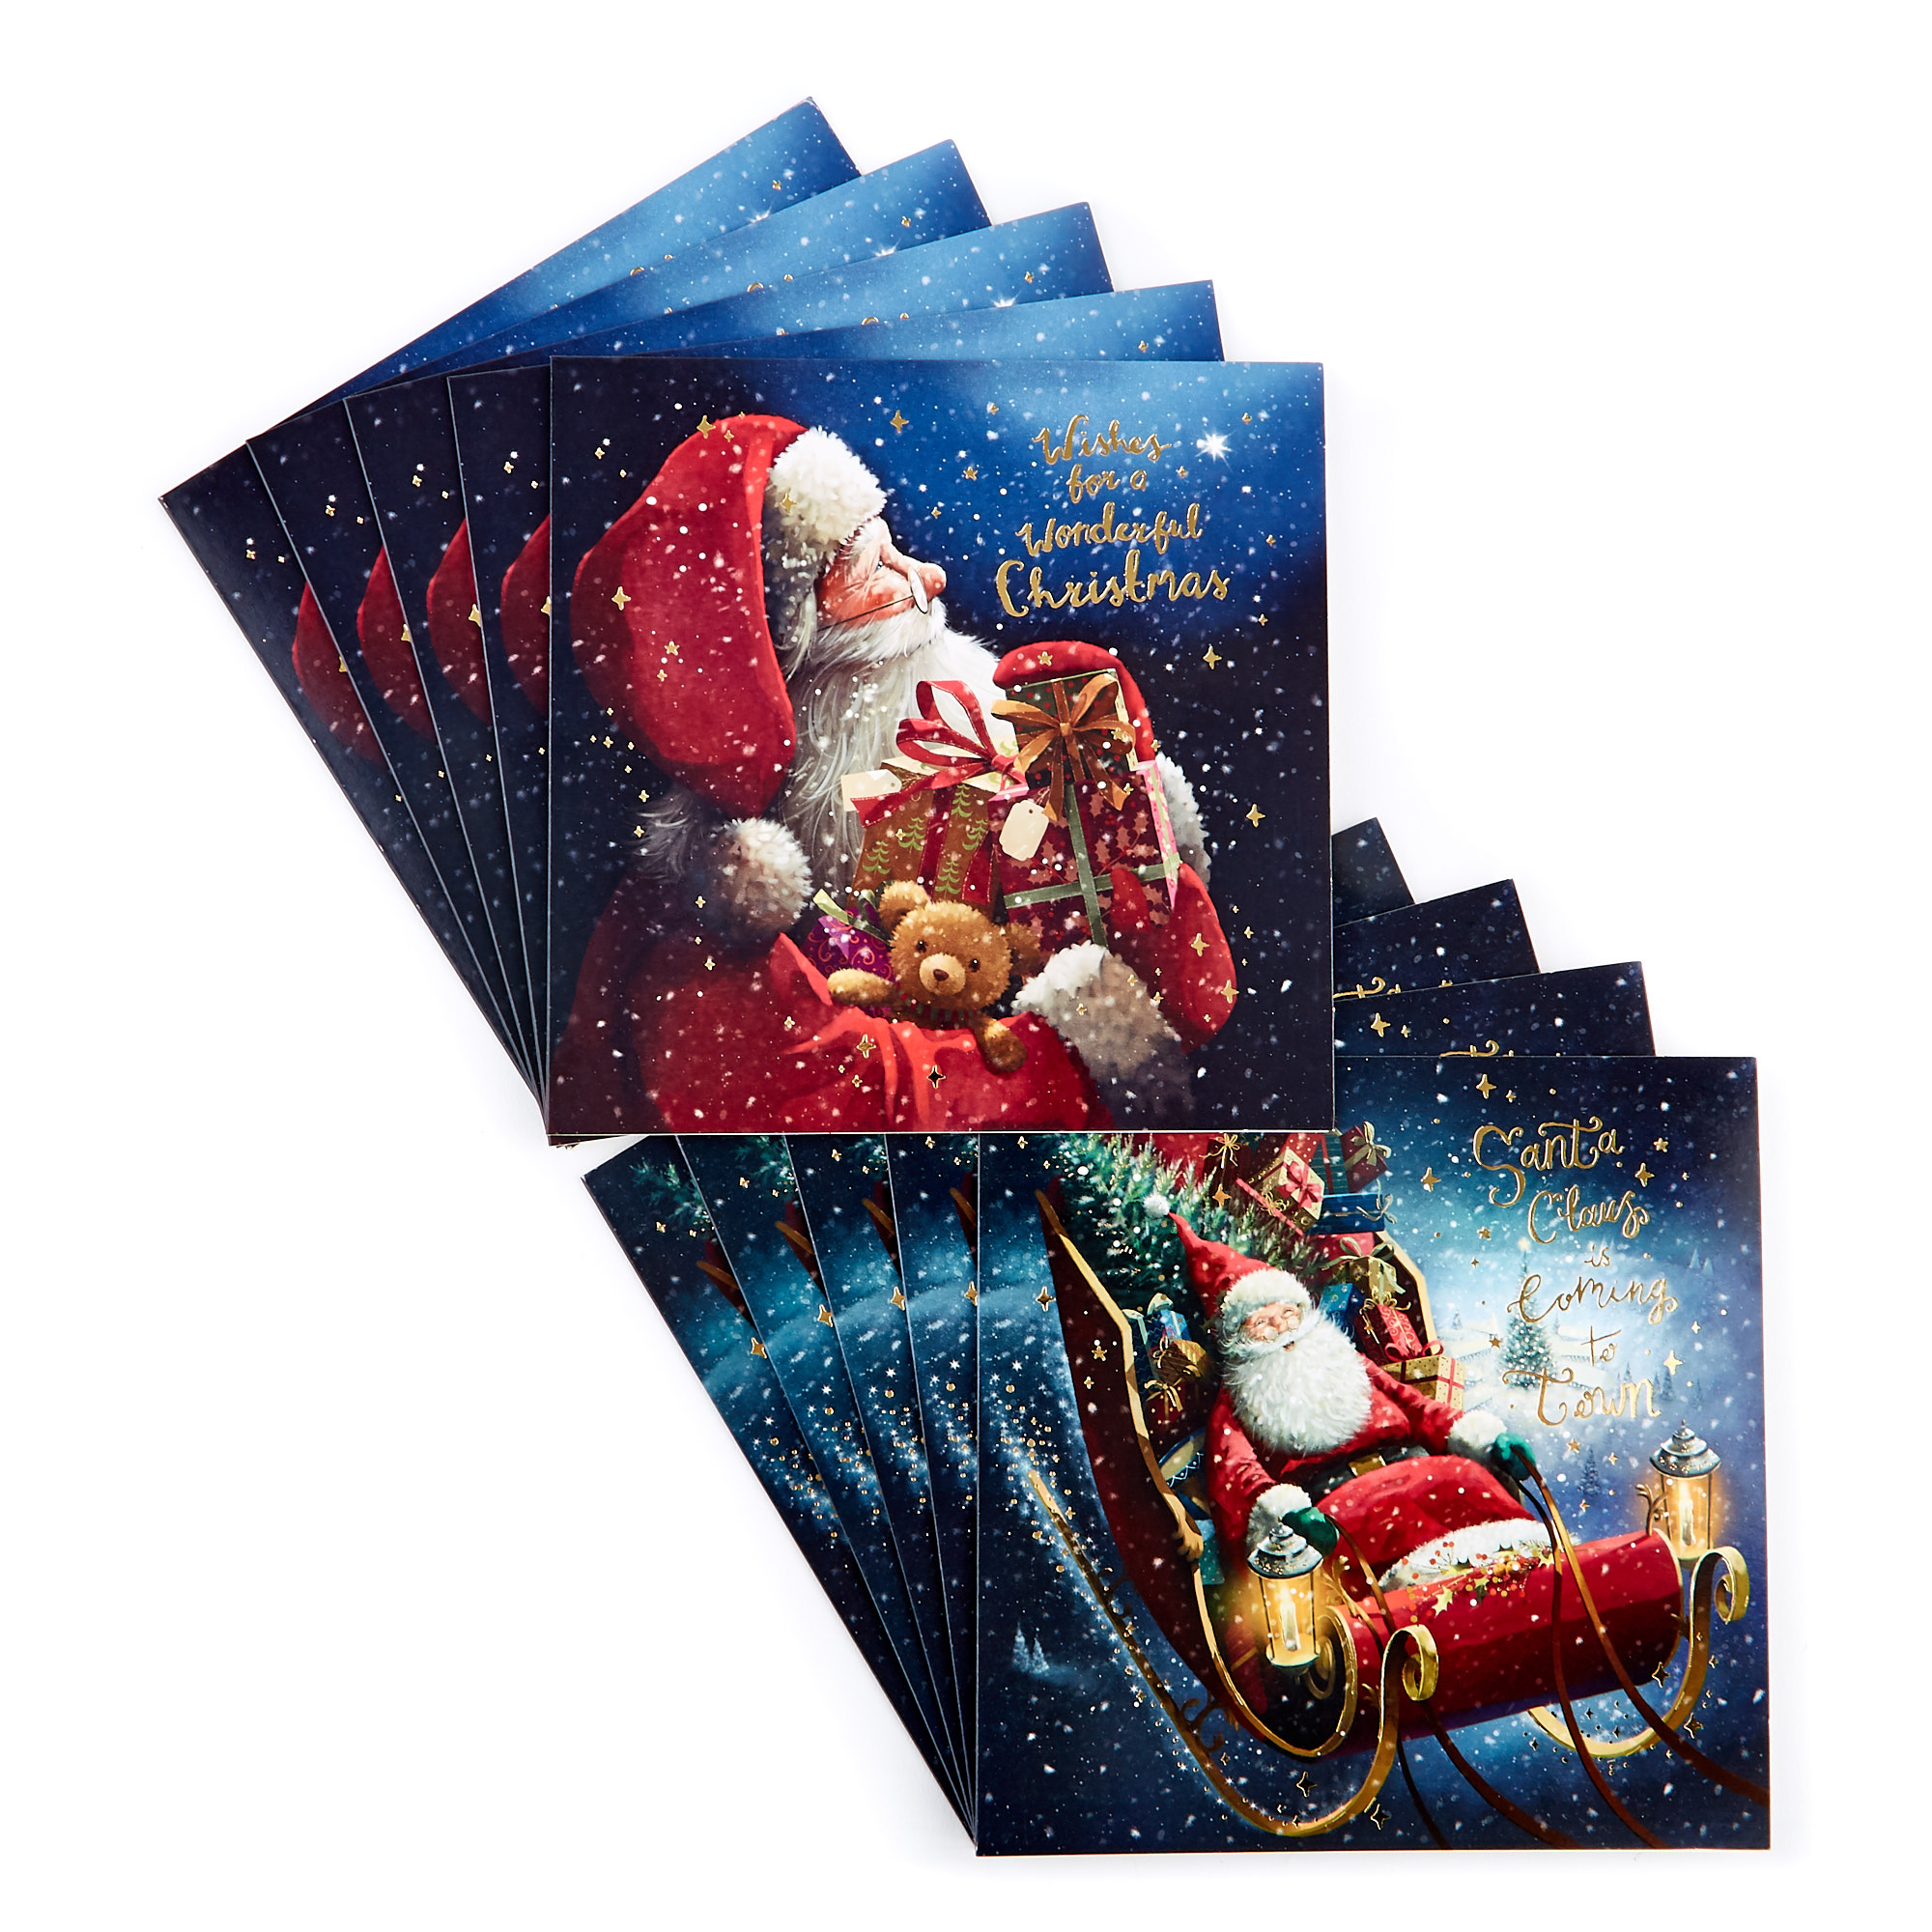 Charity Christmas Cards - Santa Claus (Pack of 16)